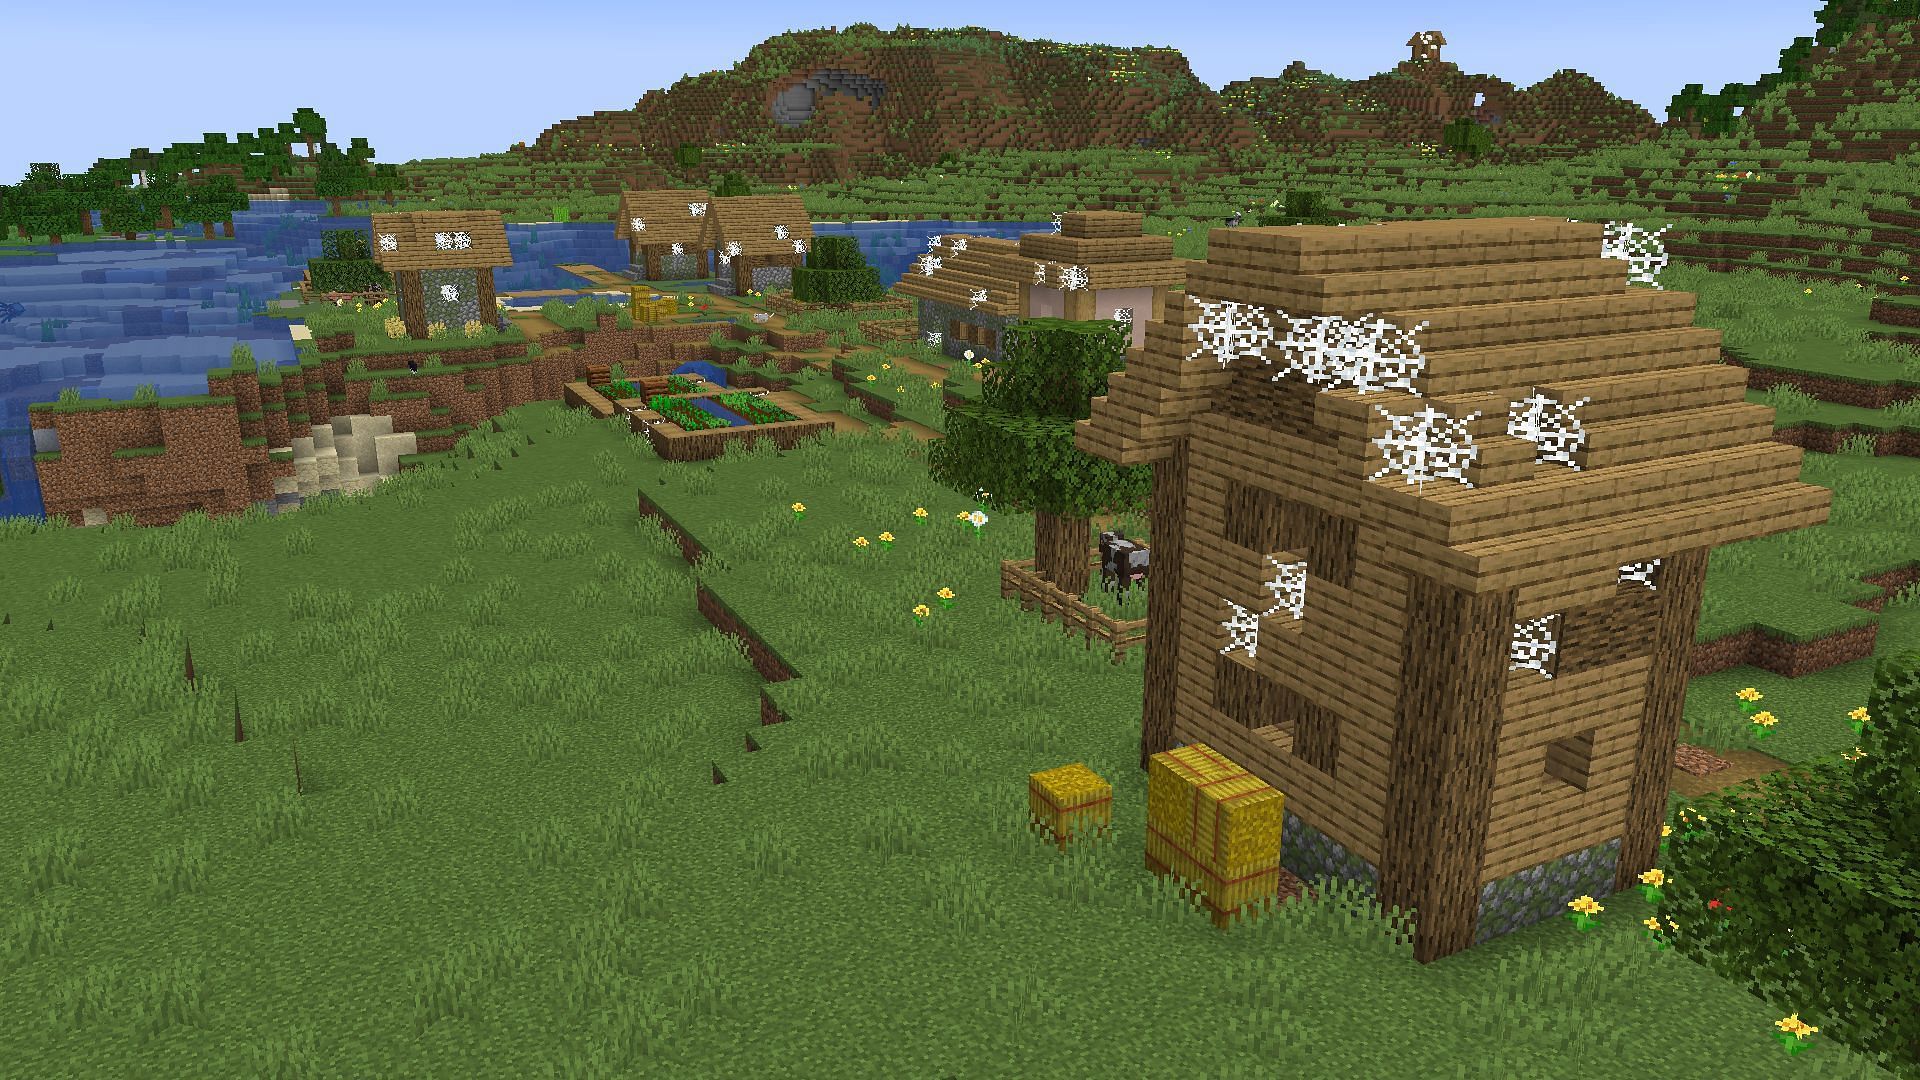 Abandoned Zombie Villager near spawn (Image via Minecraft 1.19 update)